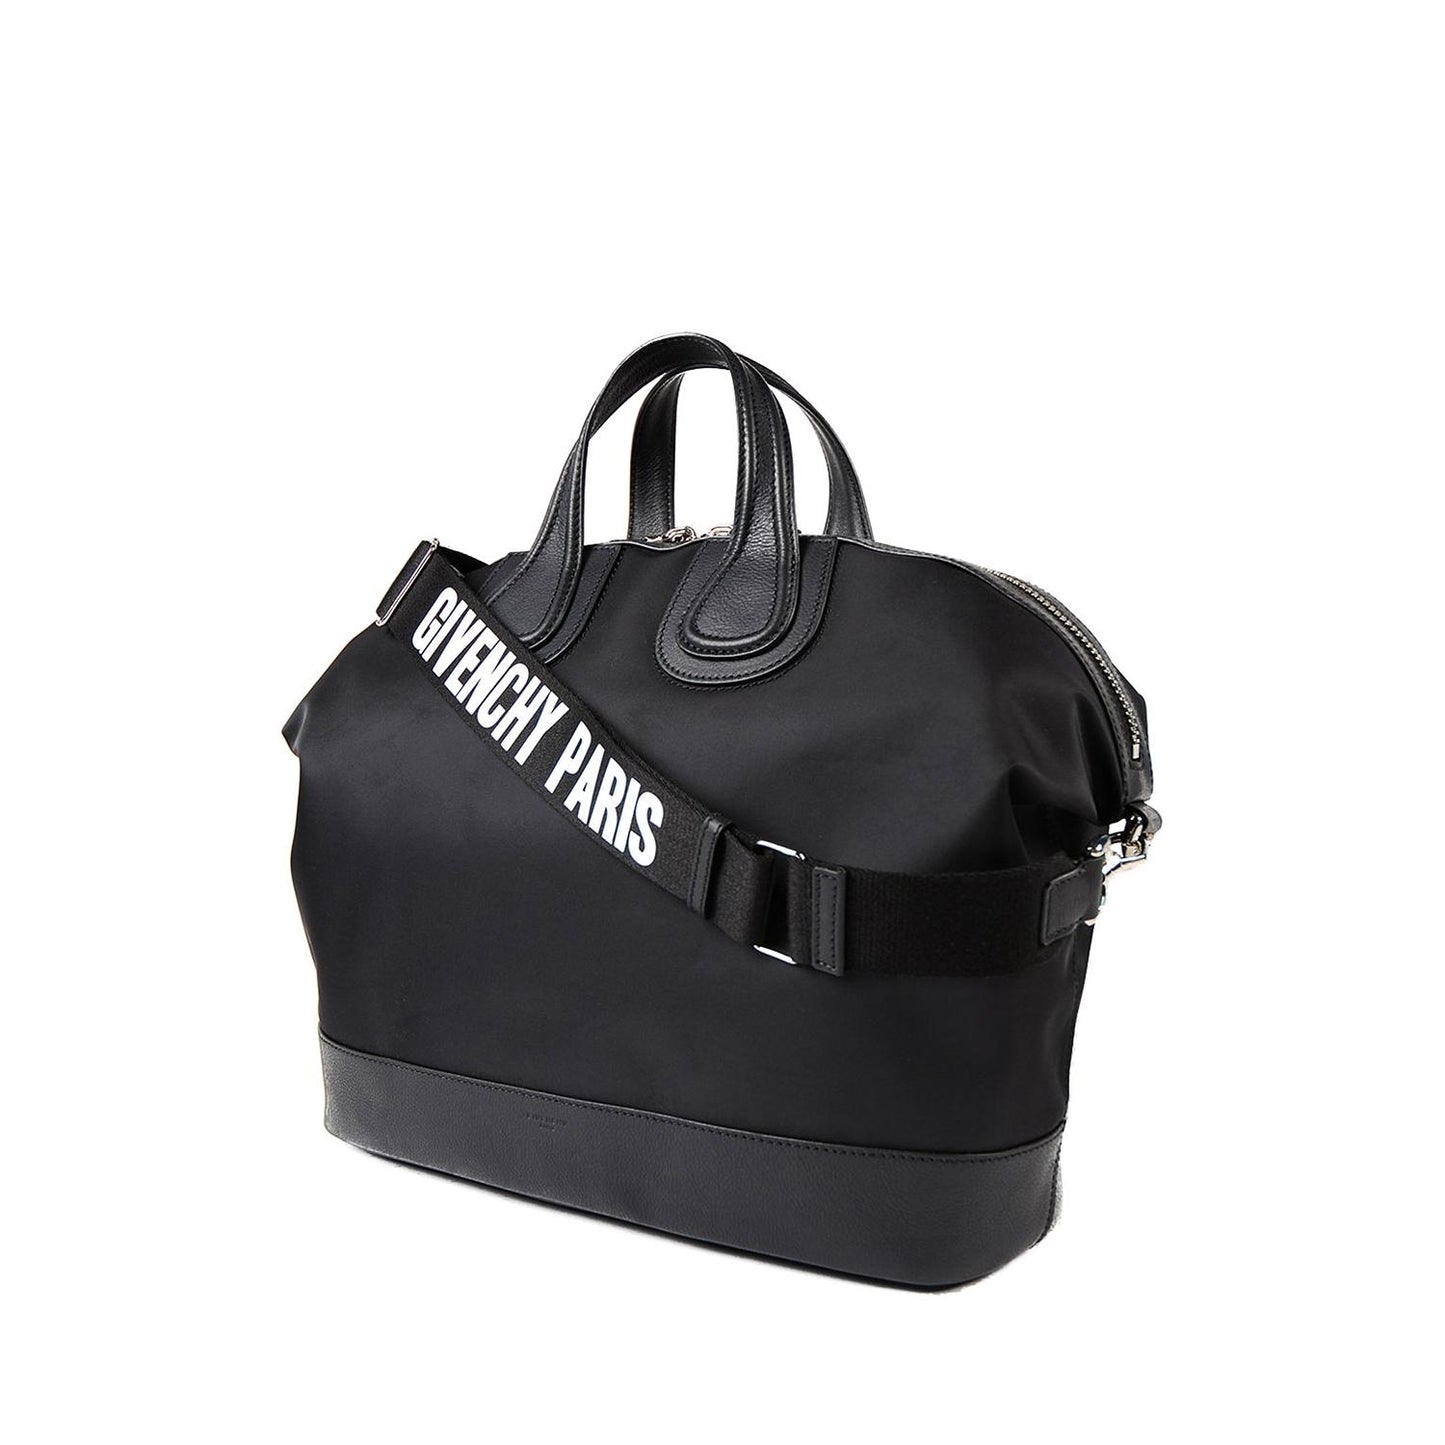 Givenchy Nightingale Small Model Handbag In Black Leather